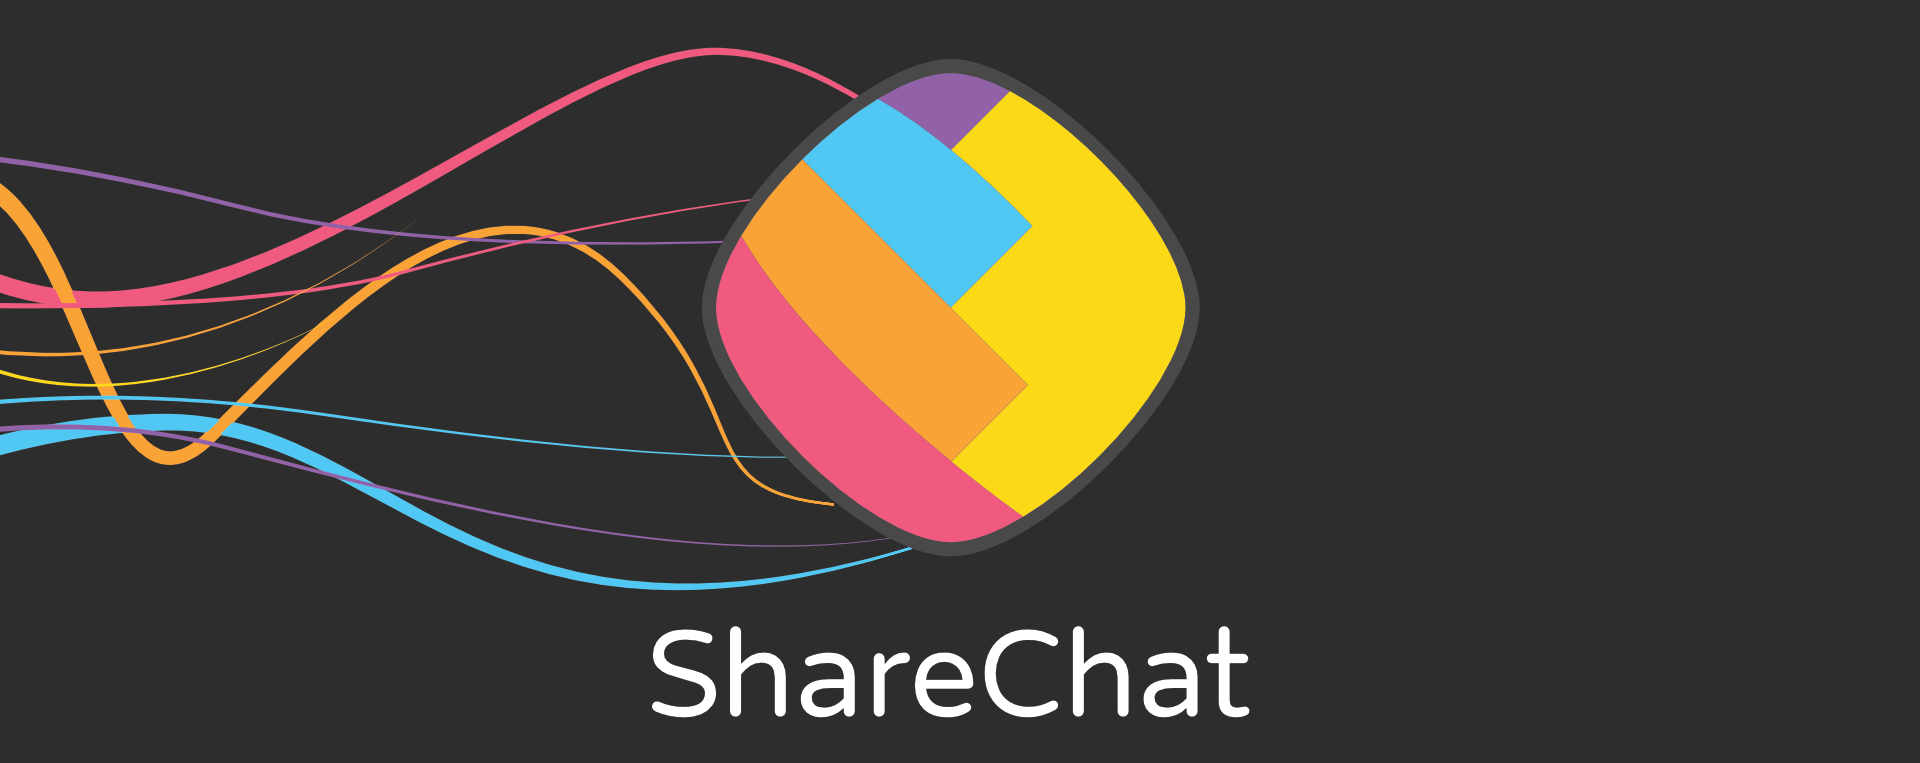 sharechat.png